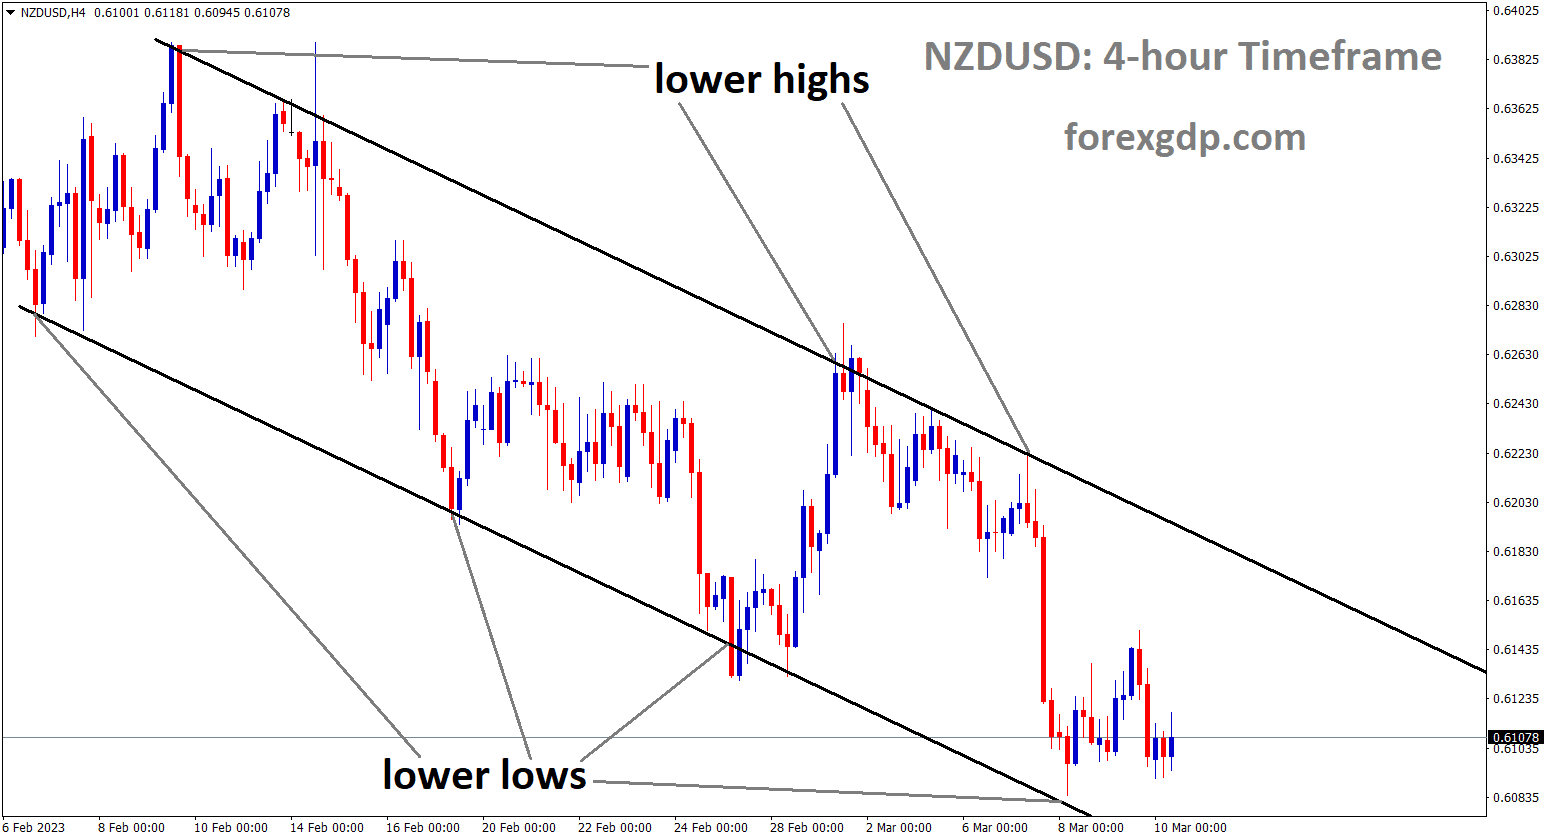 NZDUSD is moving in Descending channel and the market has rebounded from the lower low area of the channel.